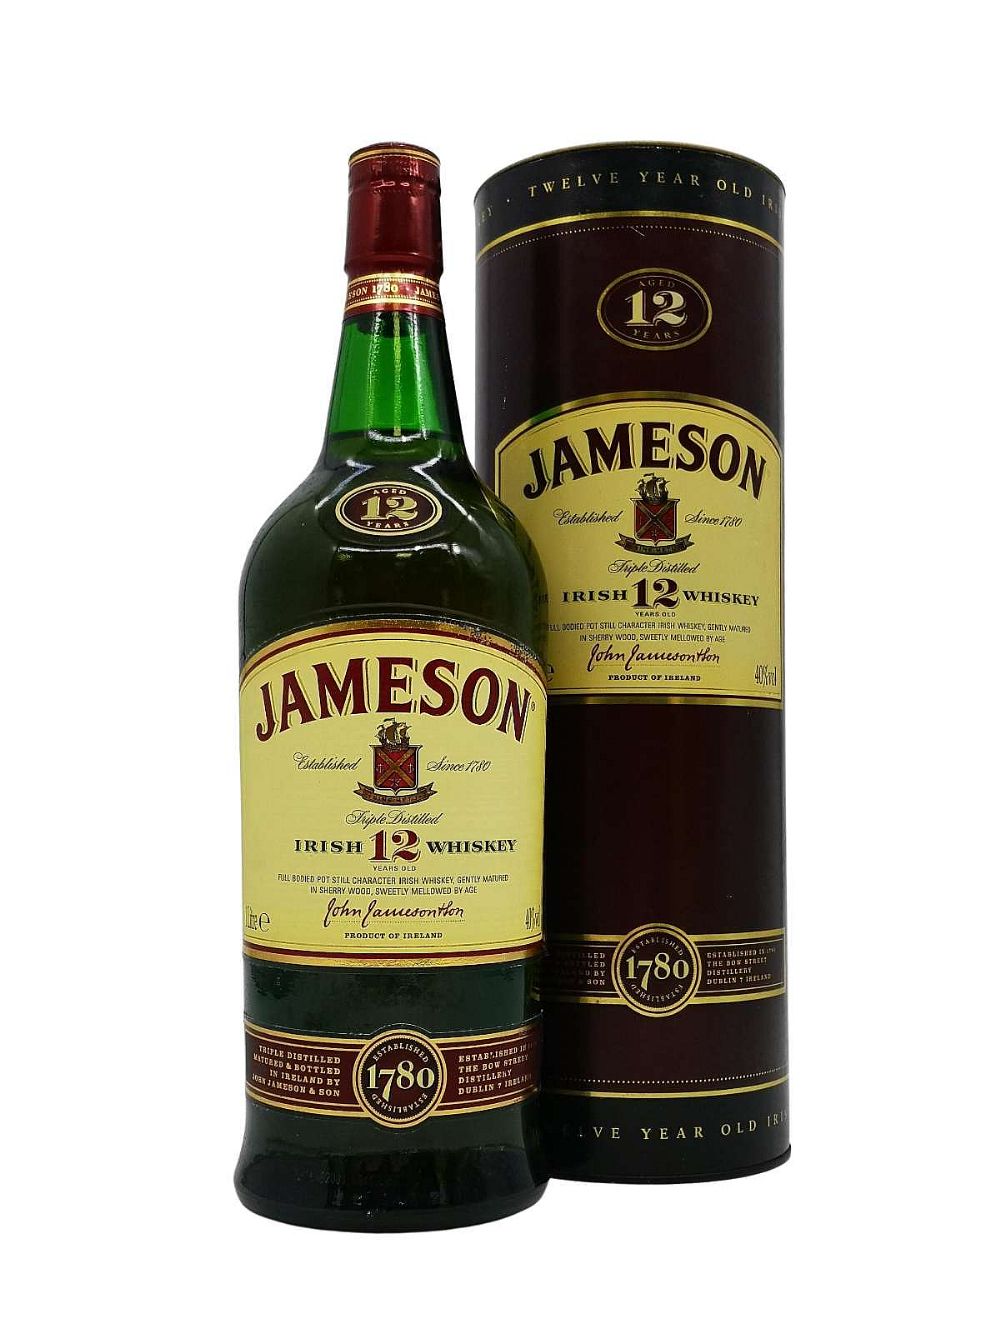 Where to buy Jameson 12 Year Old Special Reserve Blended Irish Whiskey,  County Cork, Ireland